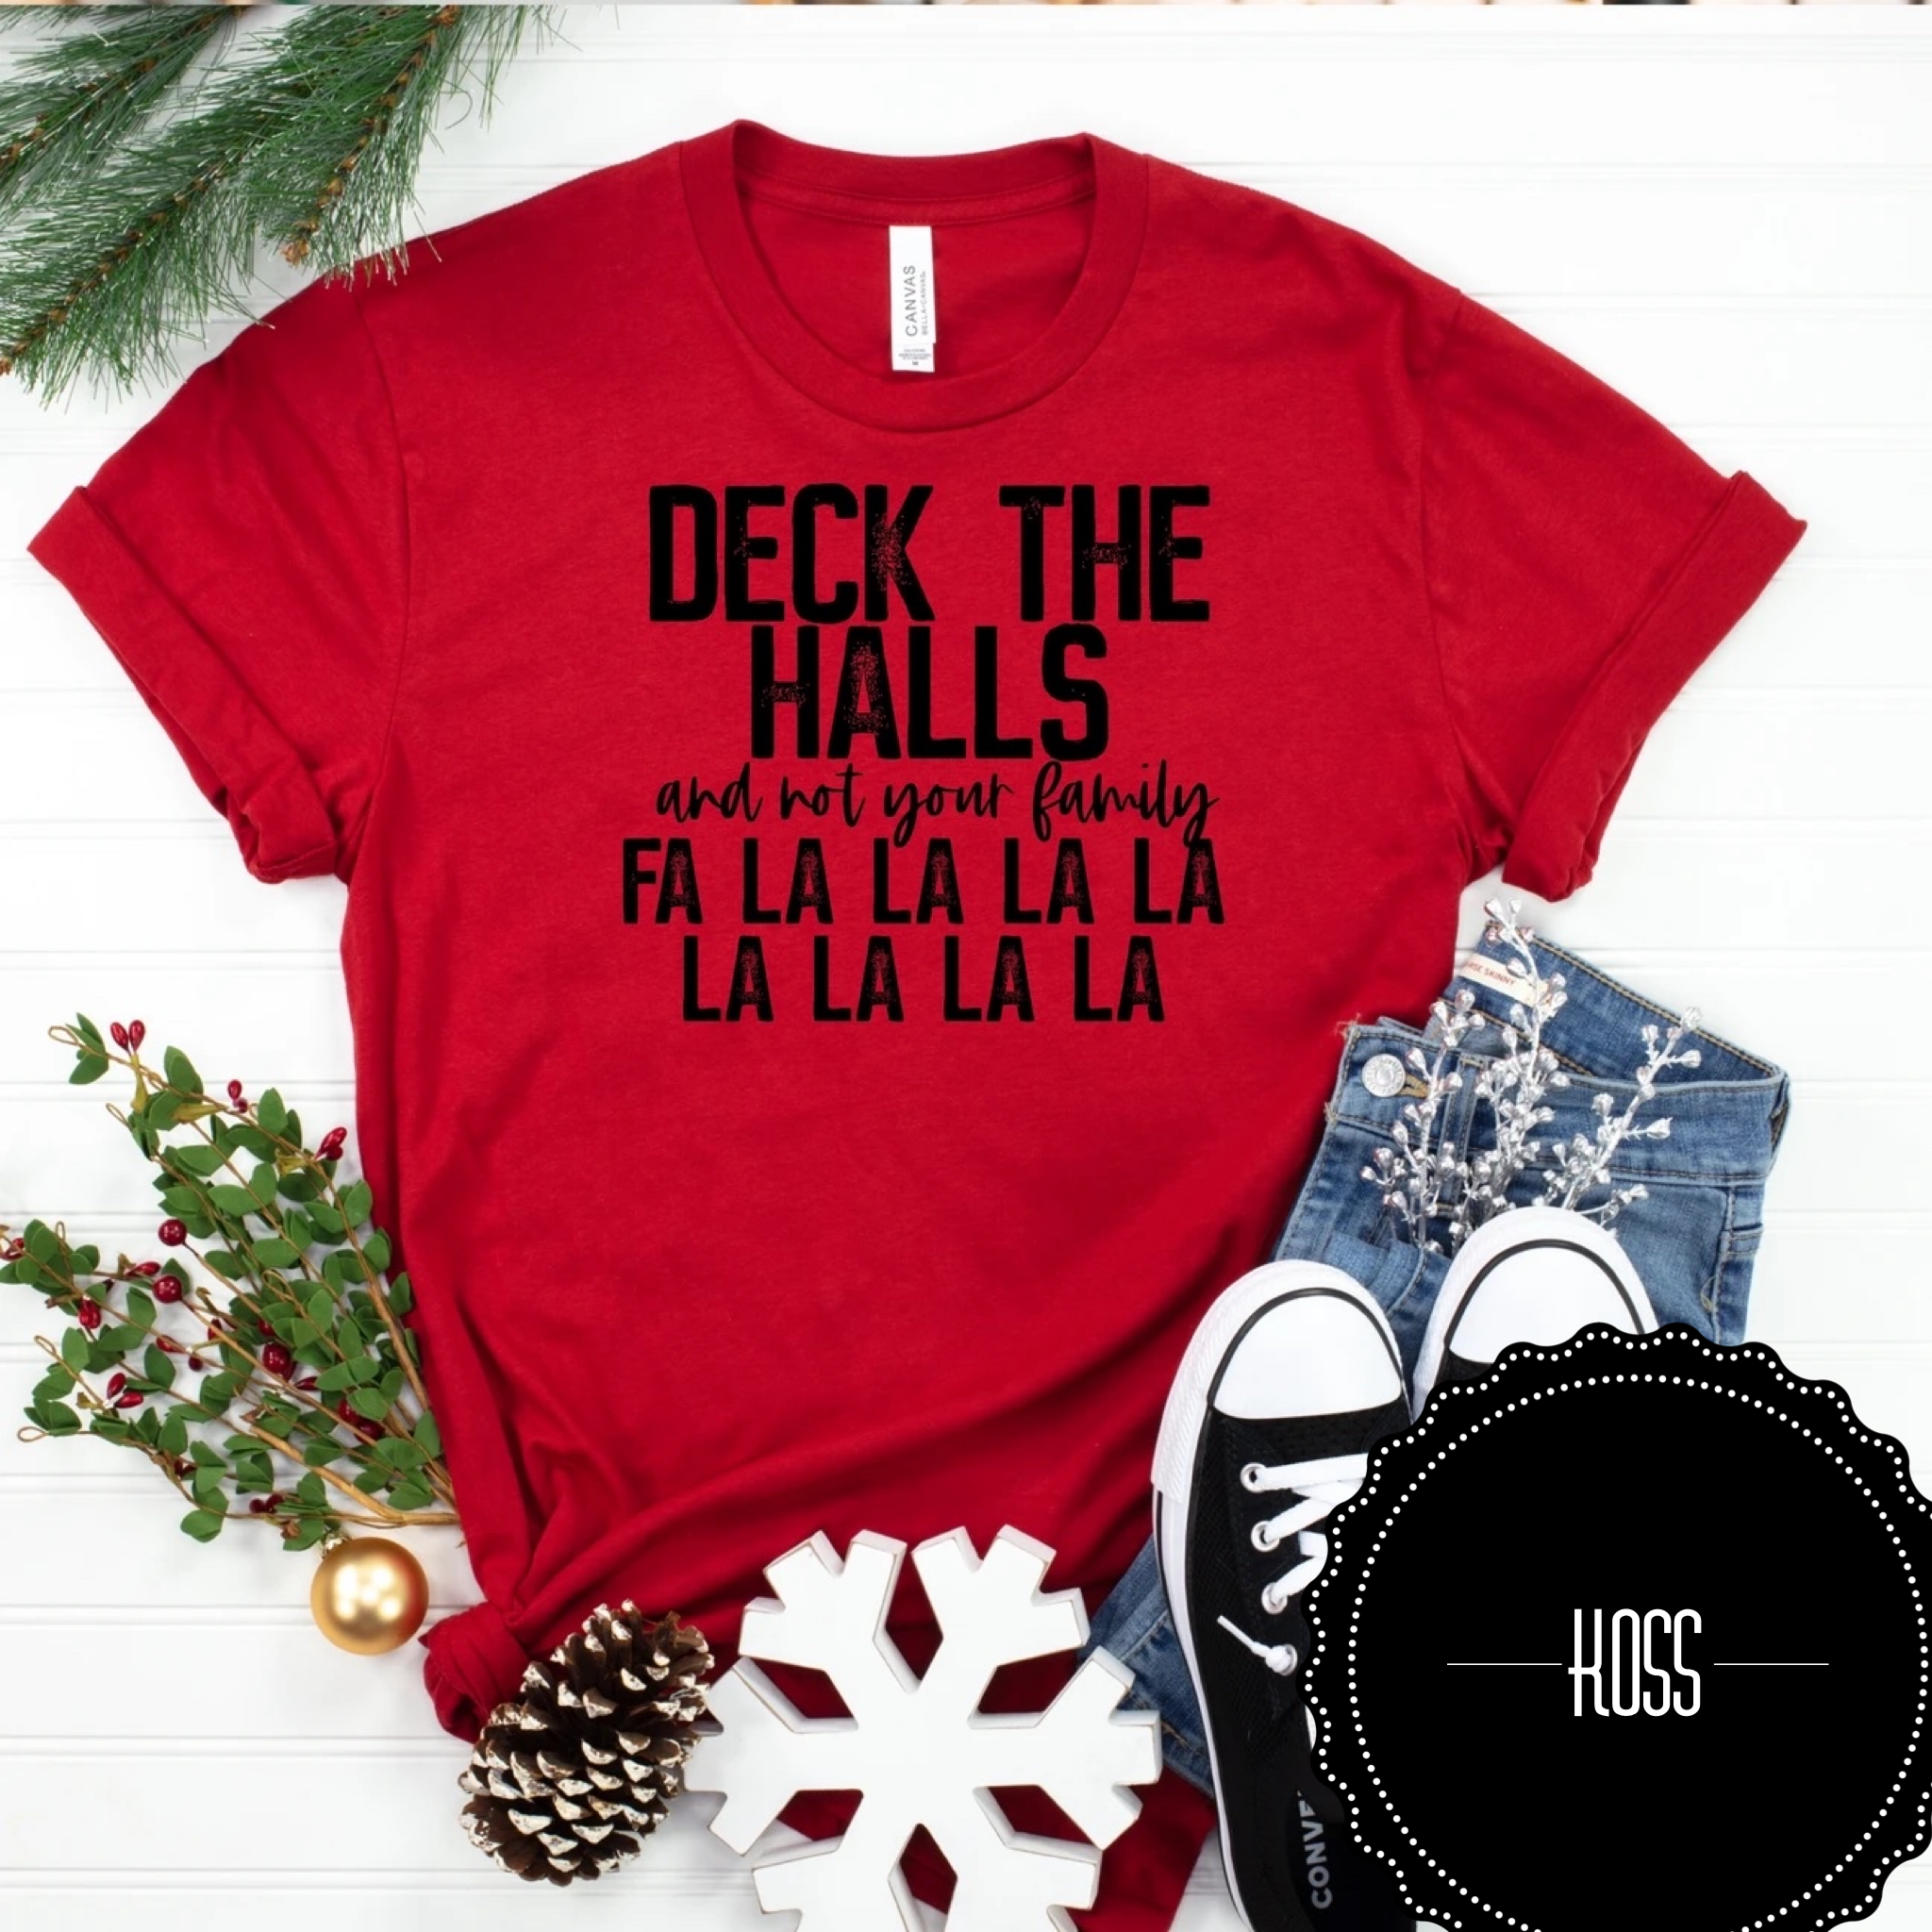 Deck the Halls and not your family